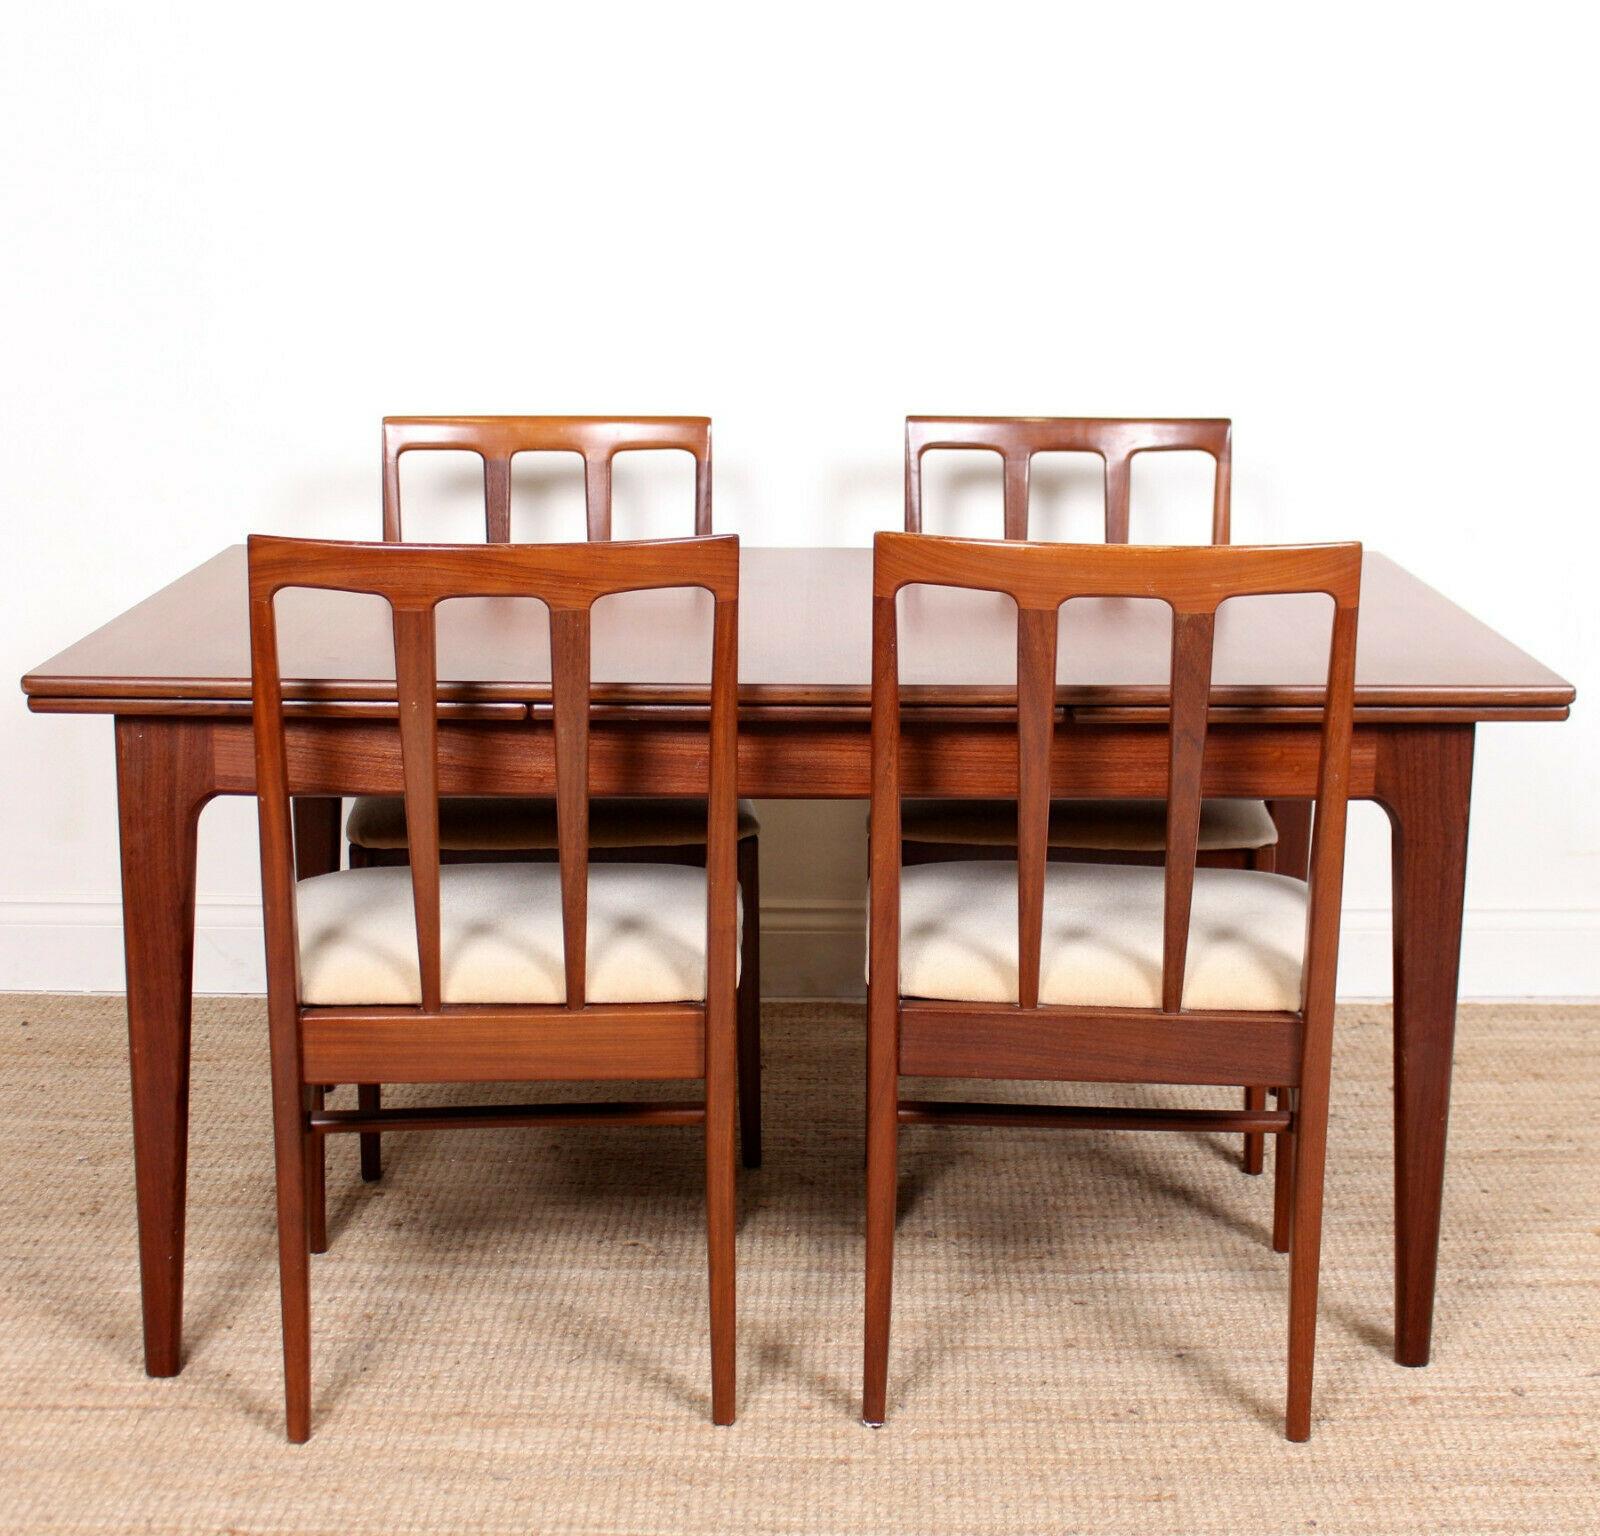 An impressive 20th century five-piece dining suite offered in very good condition.

Constructed from solid teak.

The dining table - extending by way of drawer leaf mechanism - raised on tapered legs. The chairs with the same angular tapered